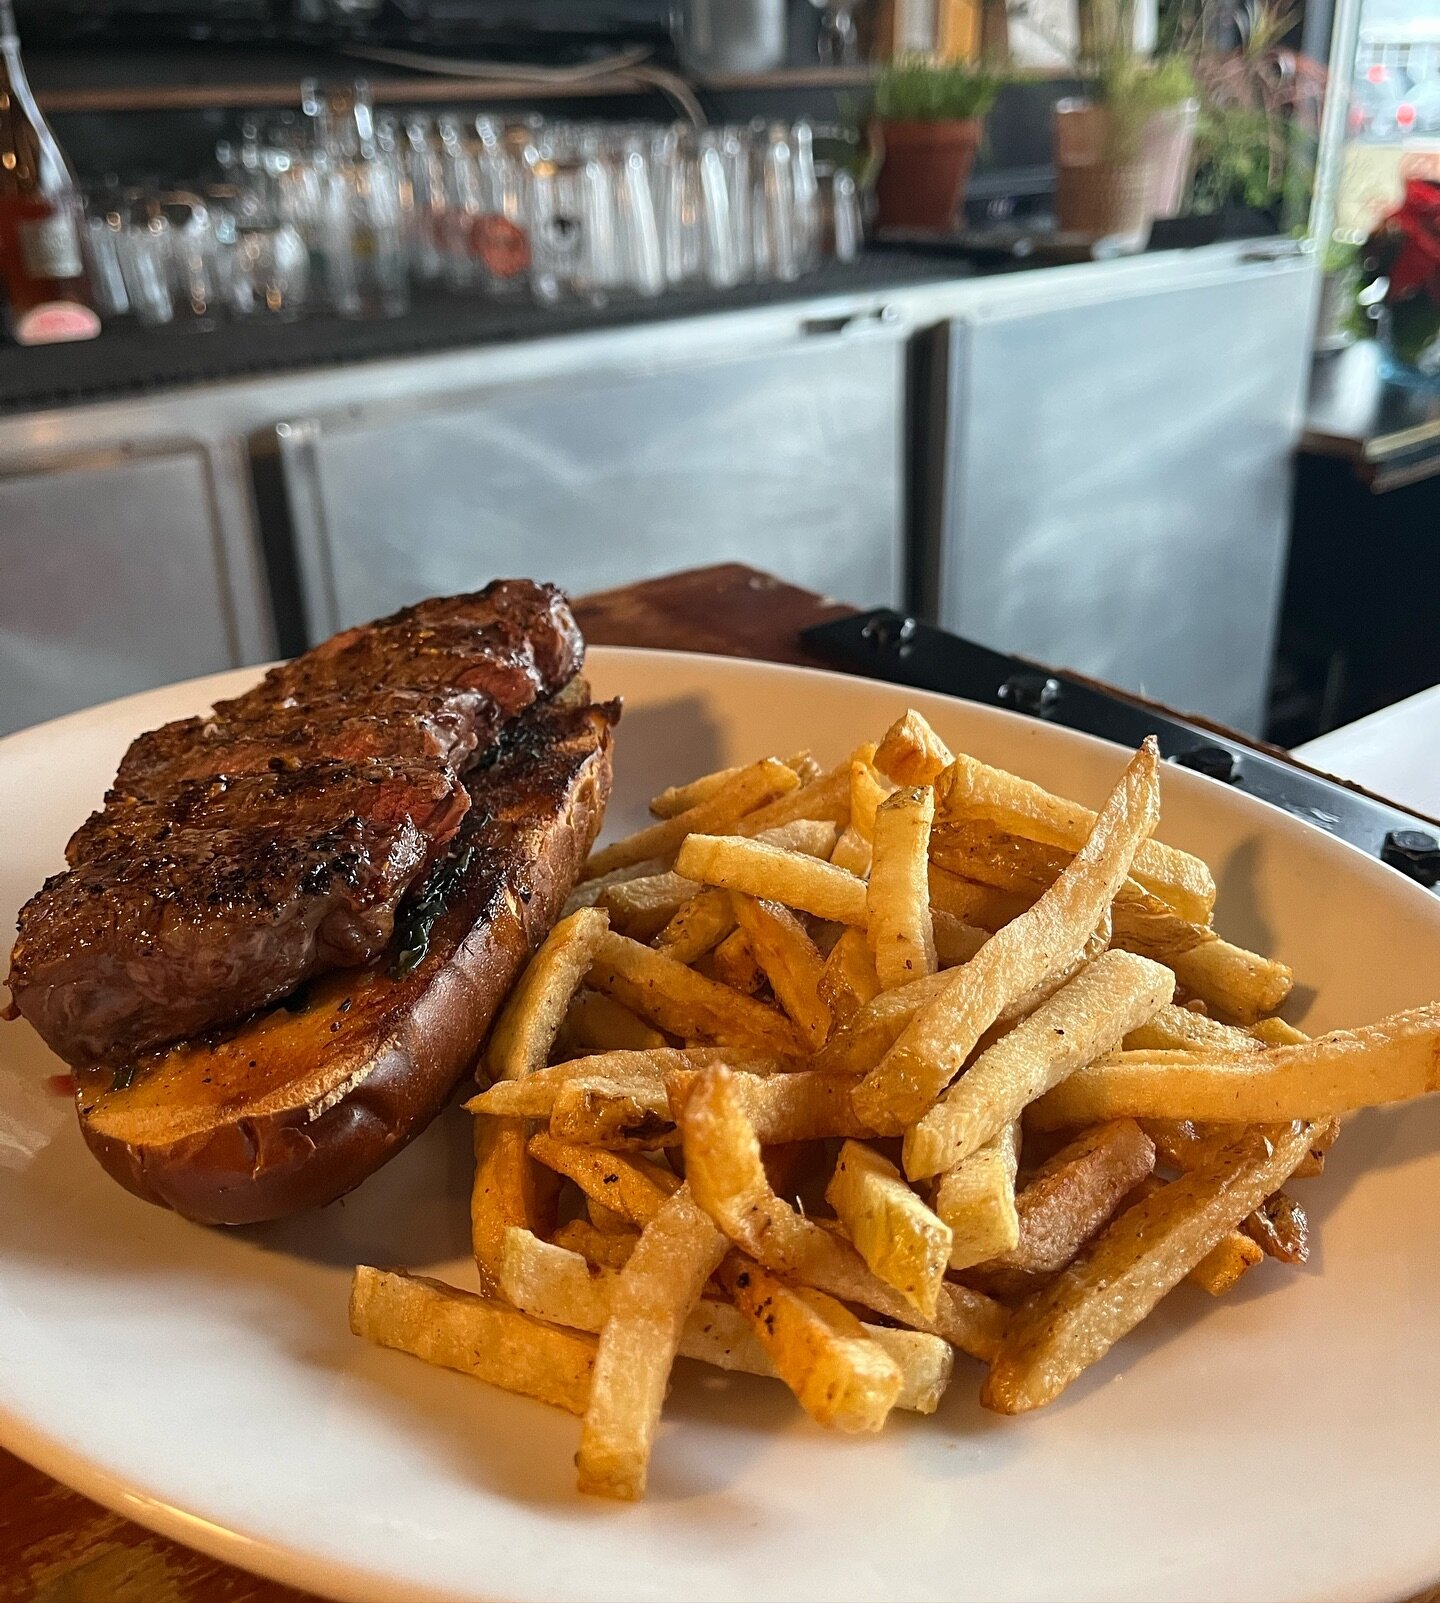 Steak Sandwich 🥩
~ 7oz striploin grilled to your liking, served on a garlic pretzel bun with your choice of side ~